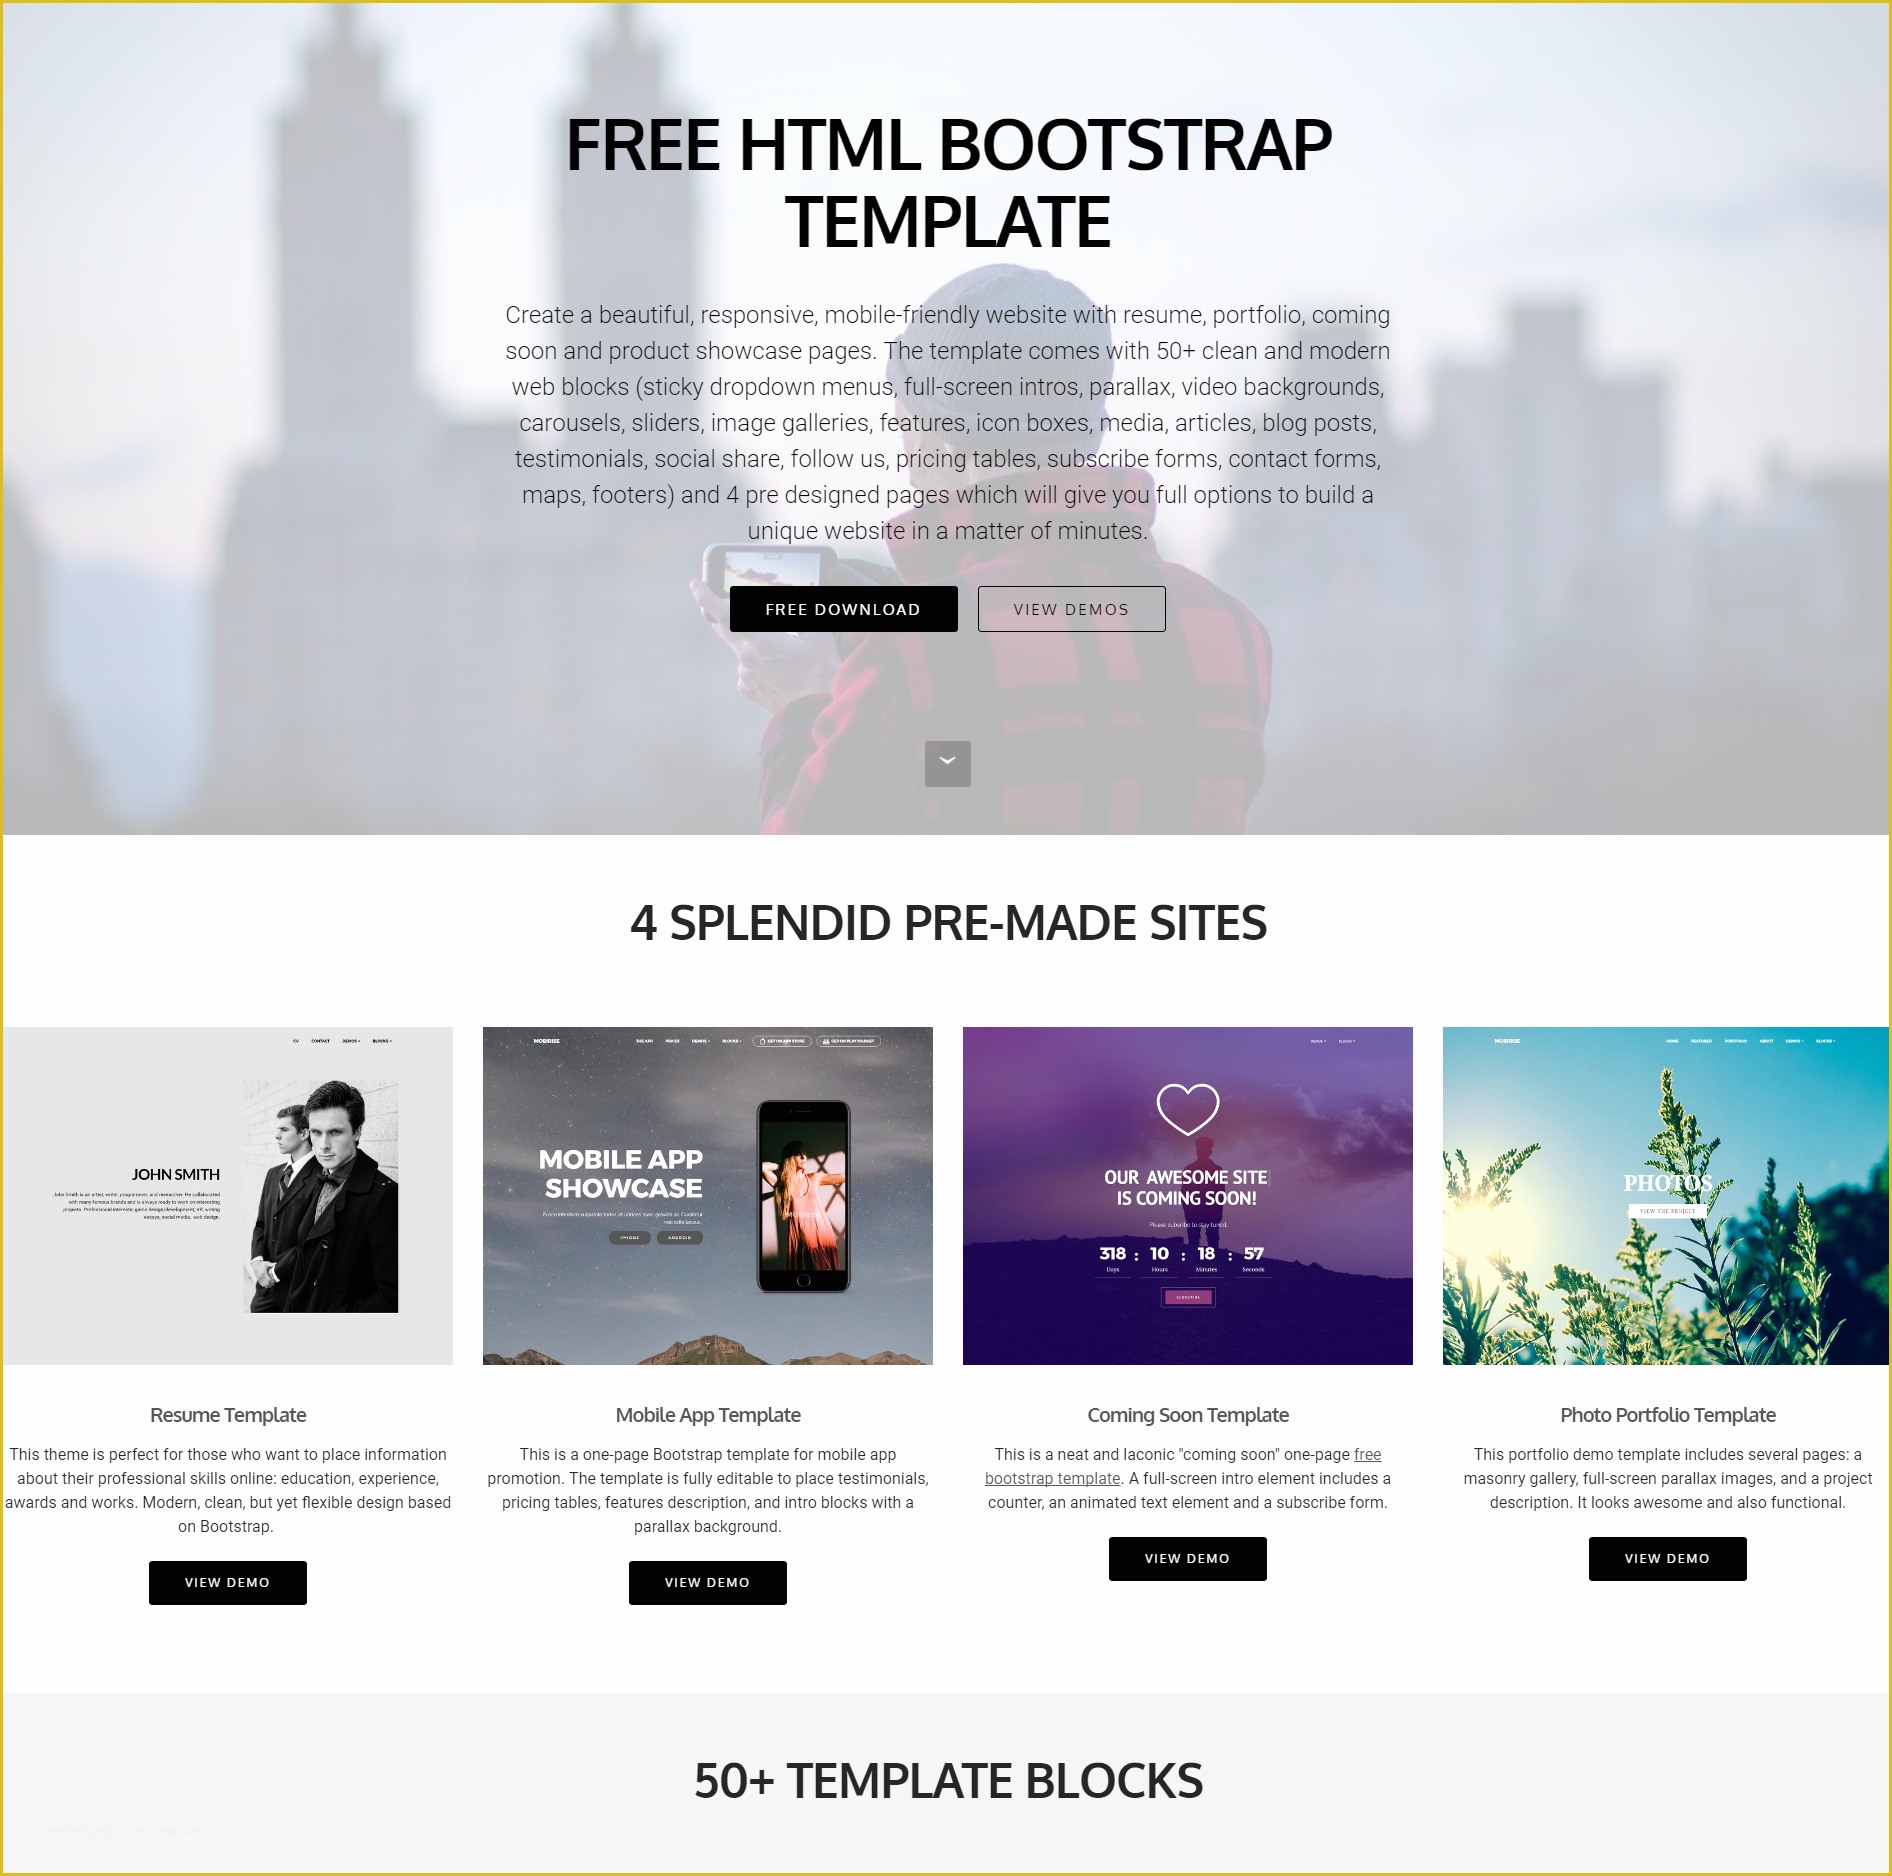 Free Python Web Templates Of 39 Brand New Free HTML Bootstrap Templates 2019